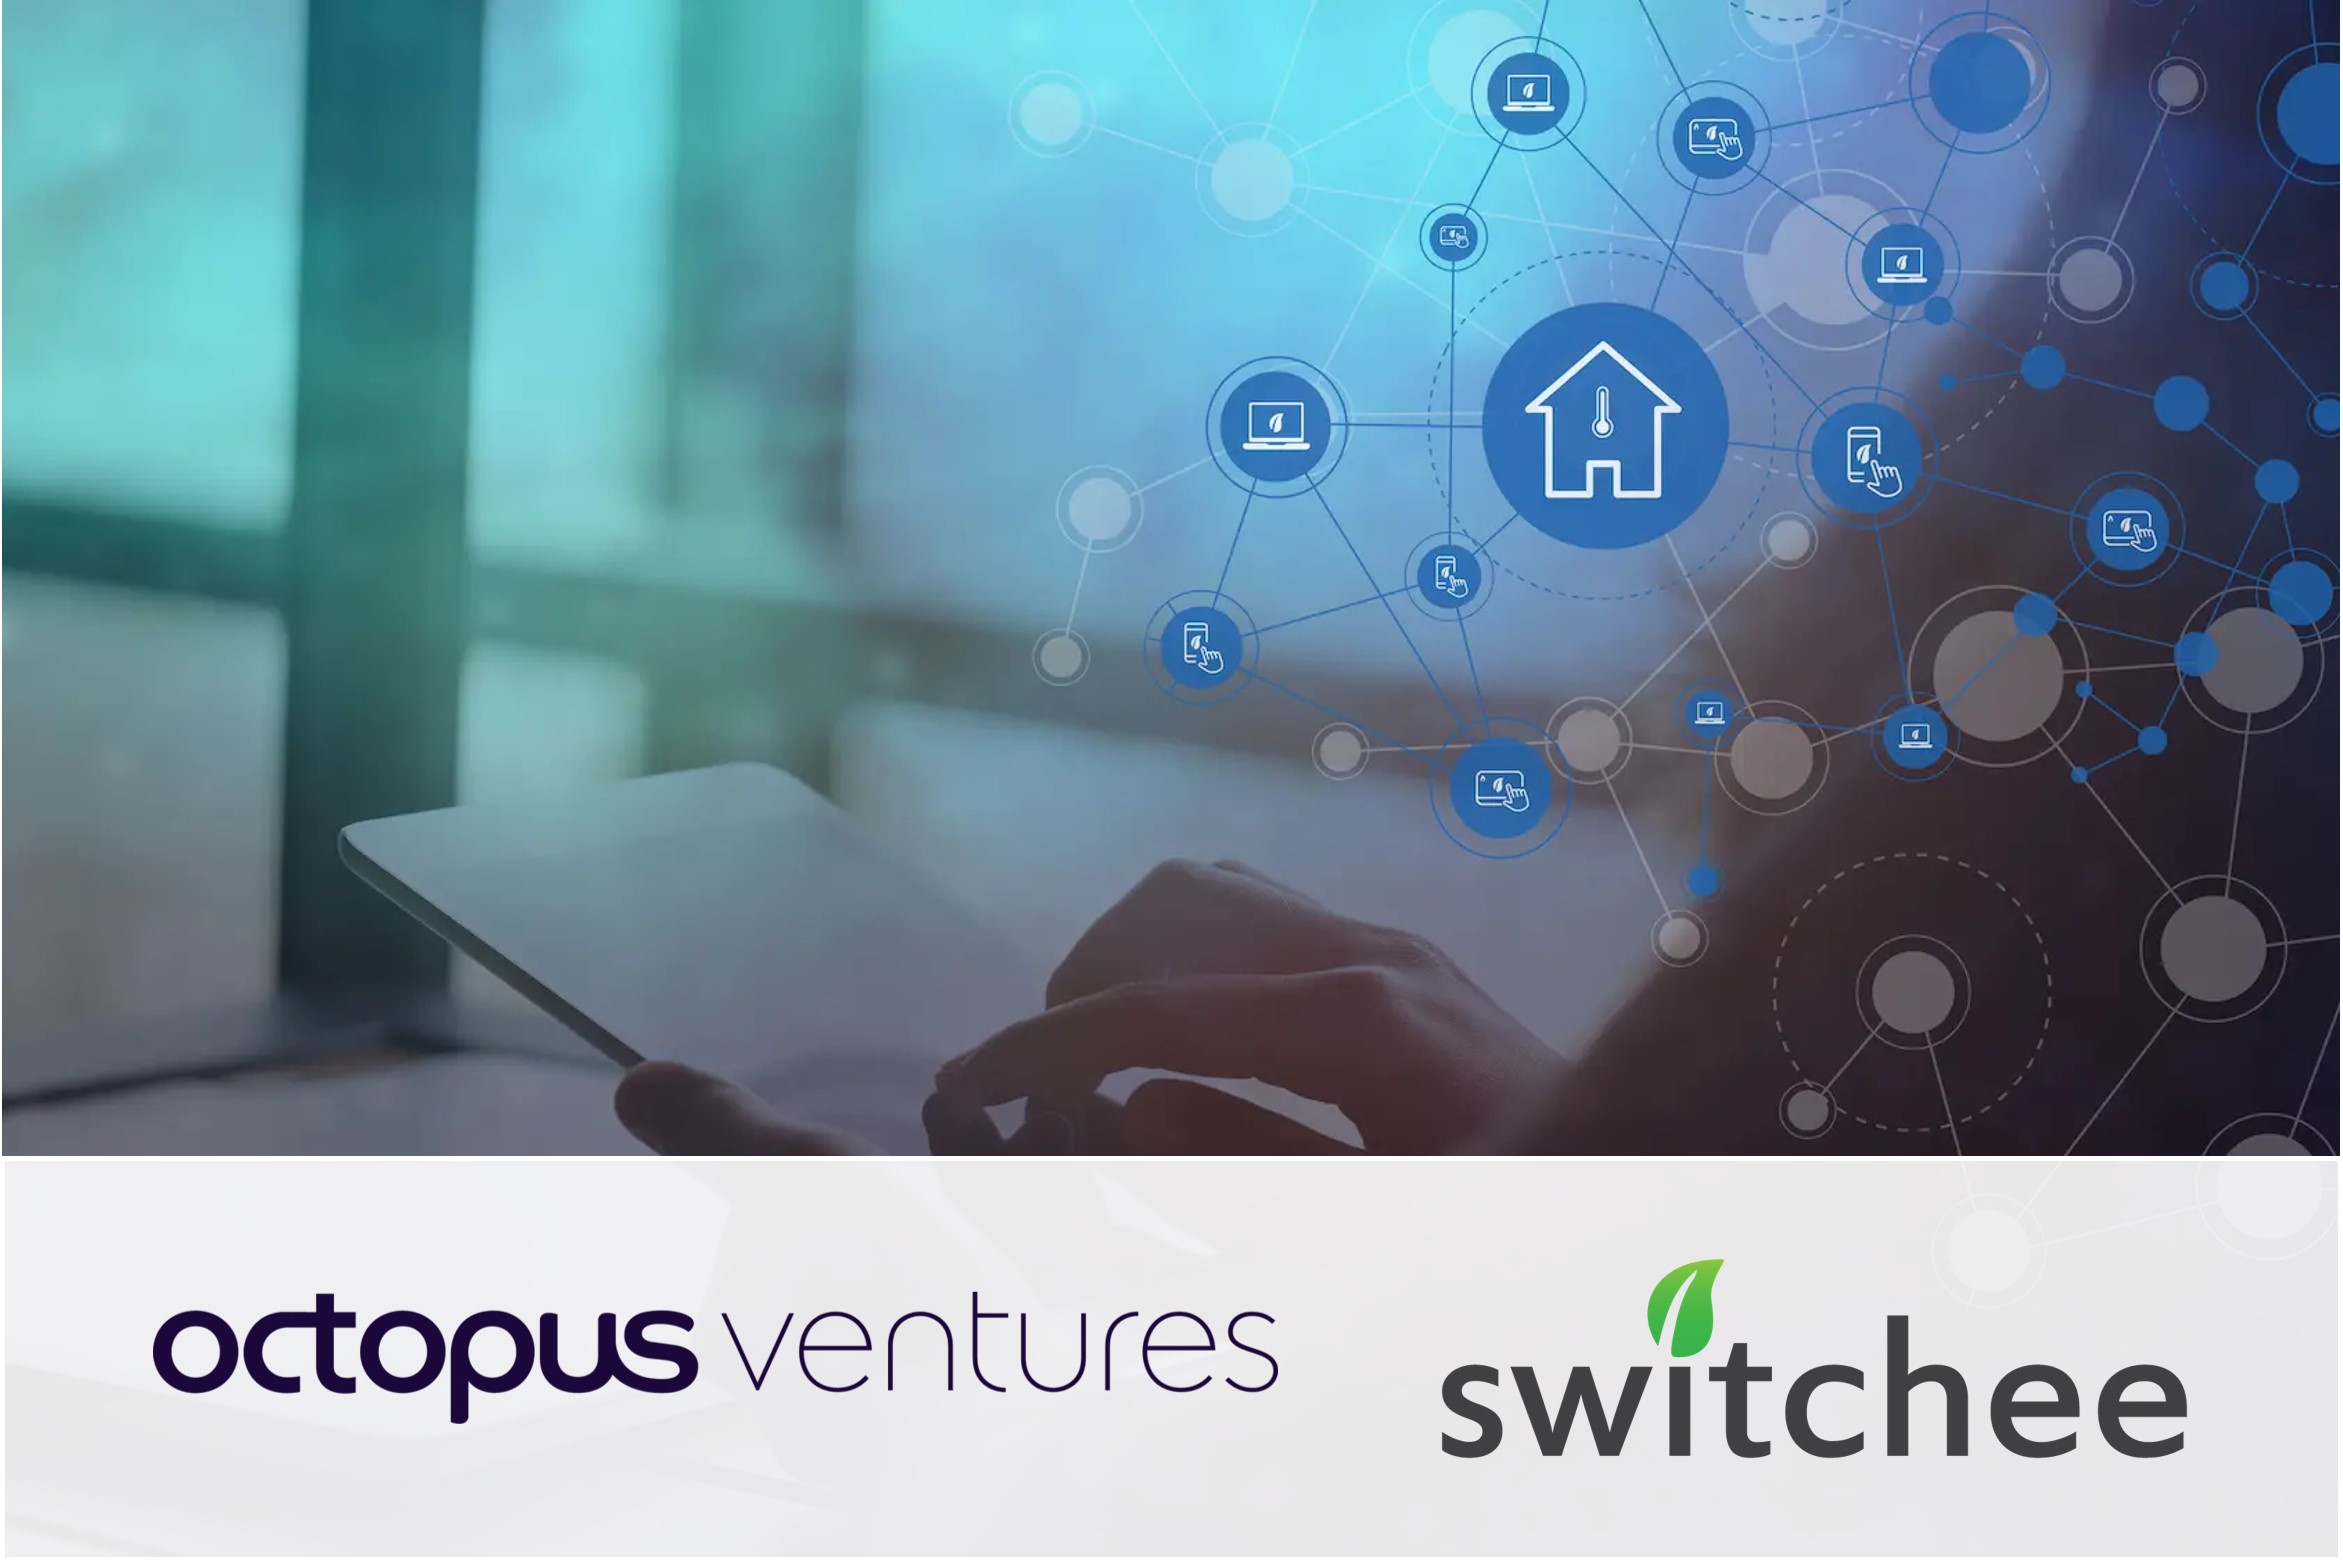 Luminii provides CDD support to Octopus Ventures on their investment in Switchee